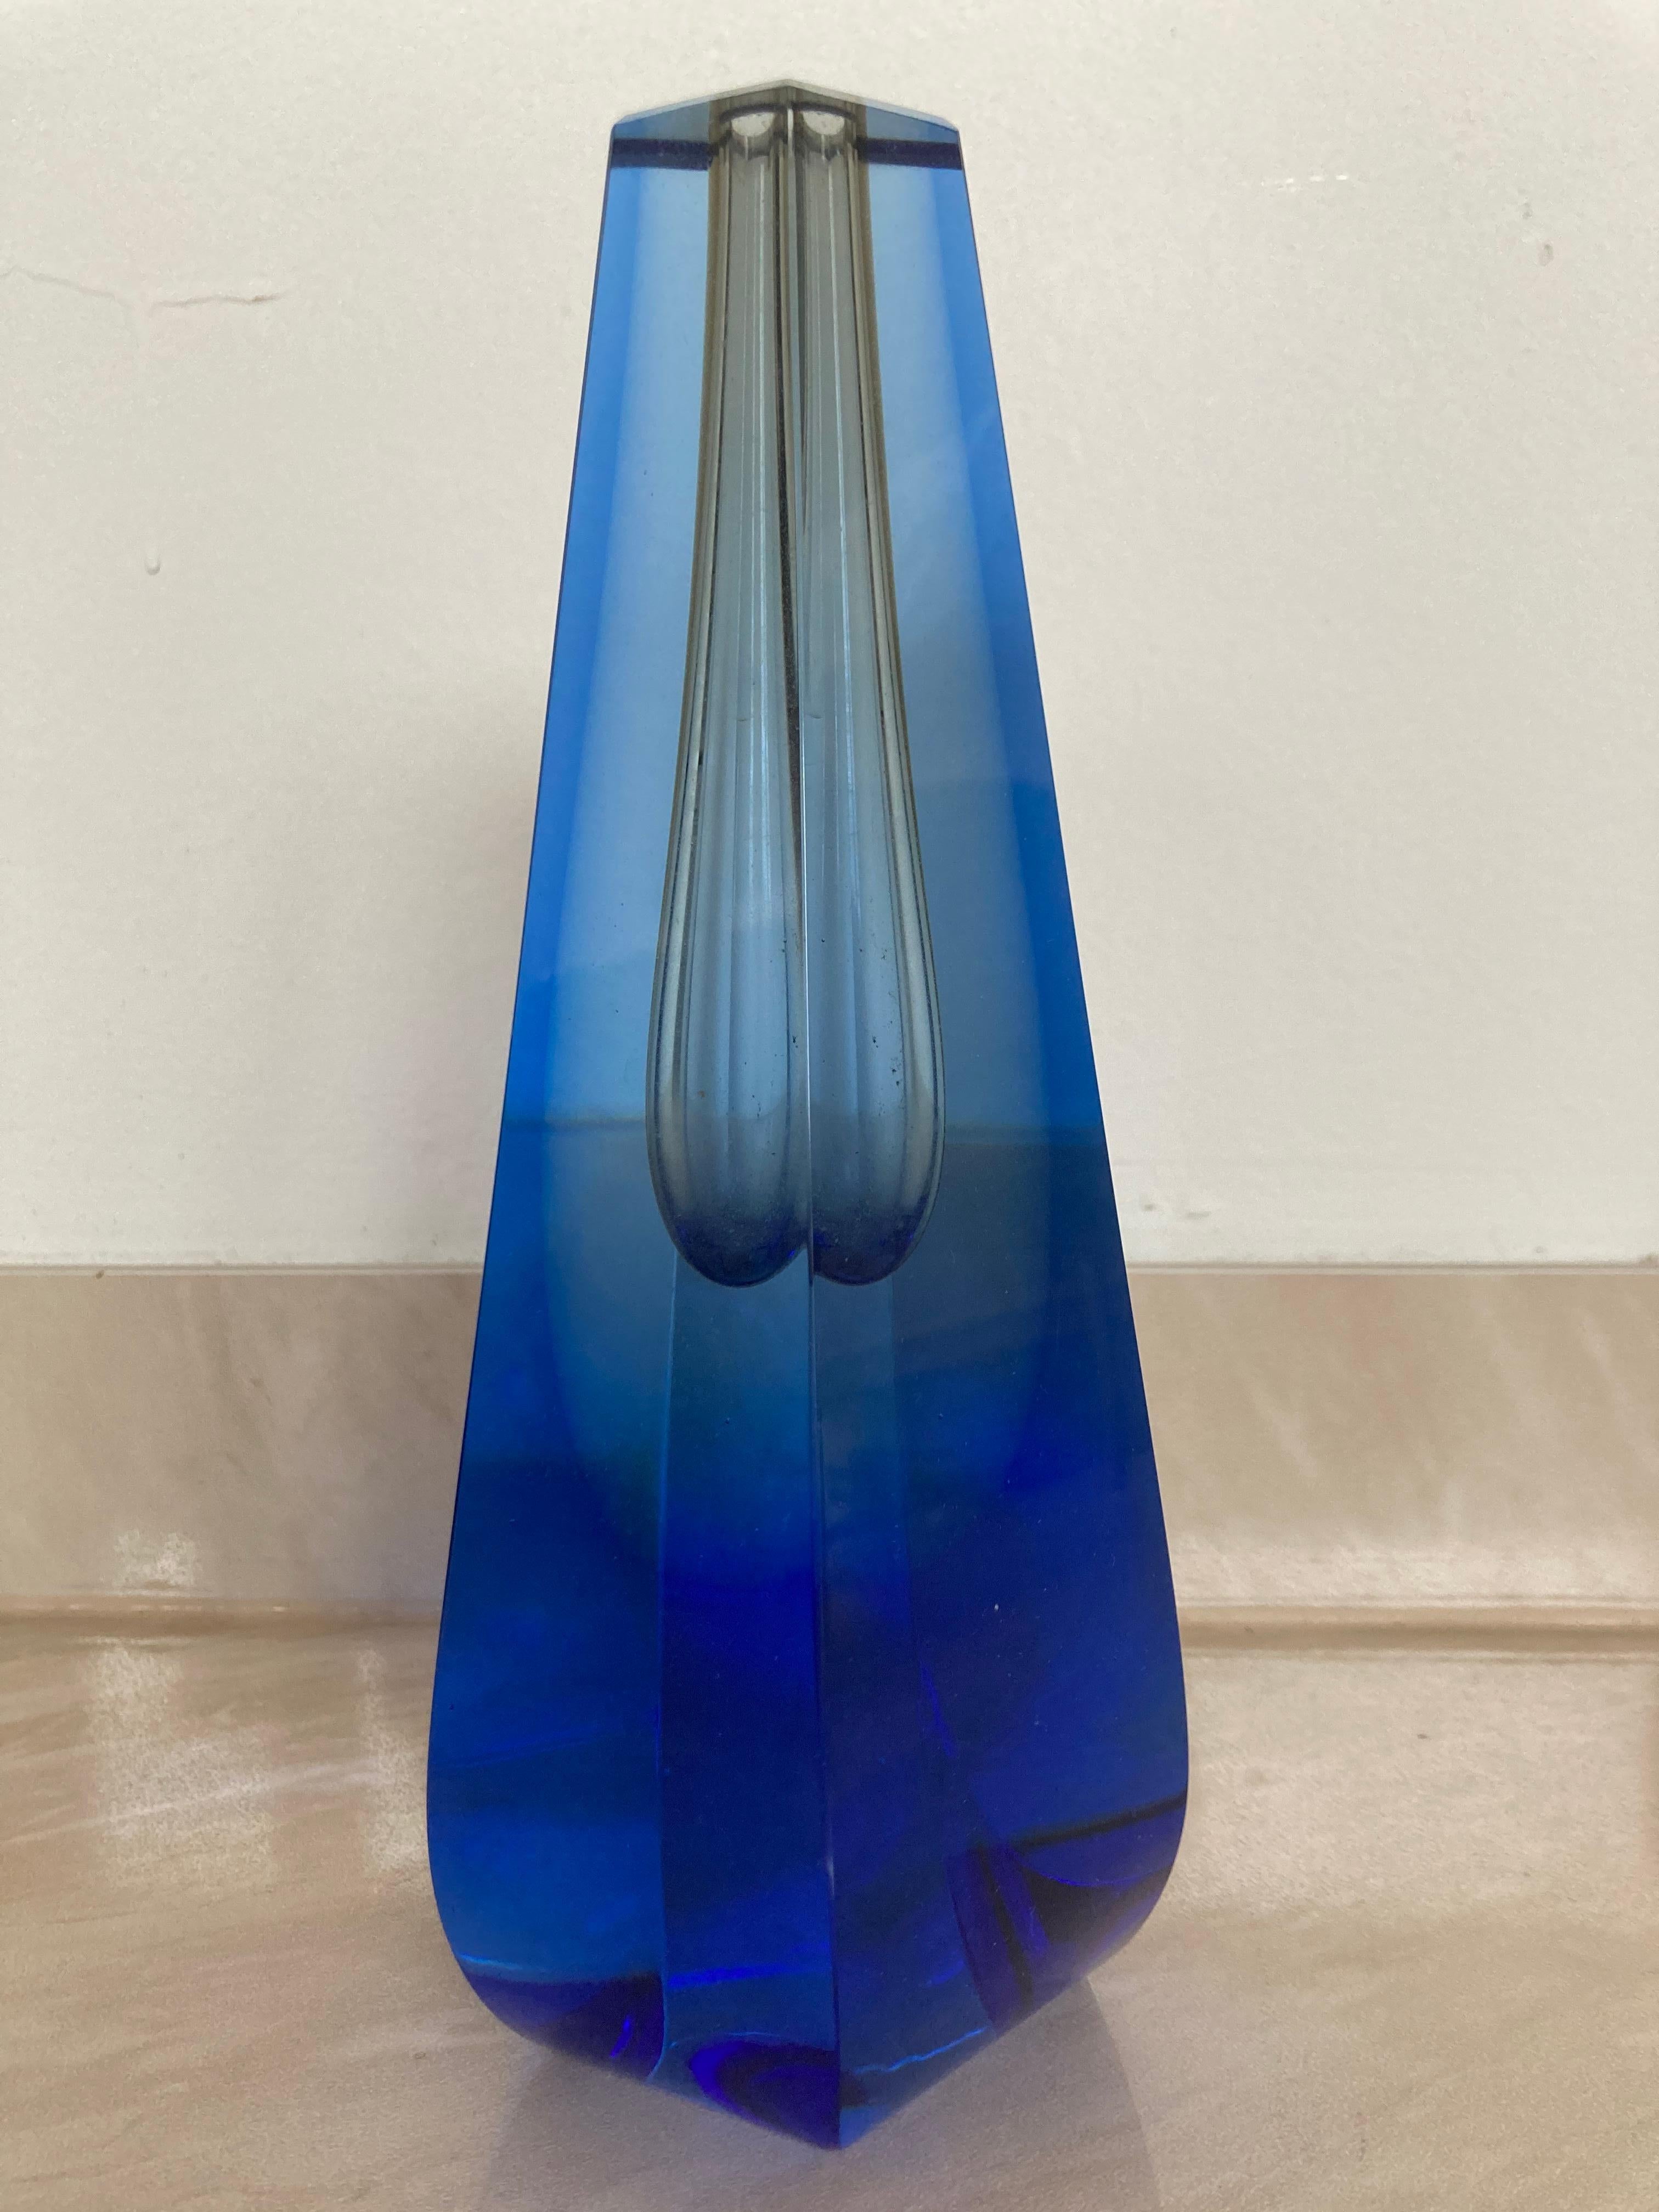 - 1970s, called 
- One of the most famous Czech designers
- Very popular one flower vase 
- Cut and polished glass.